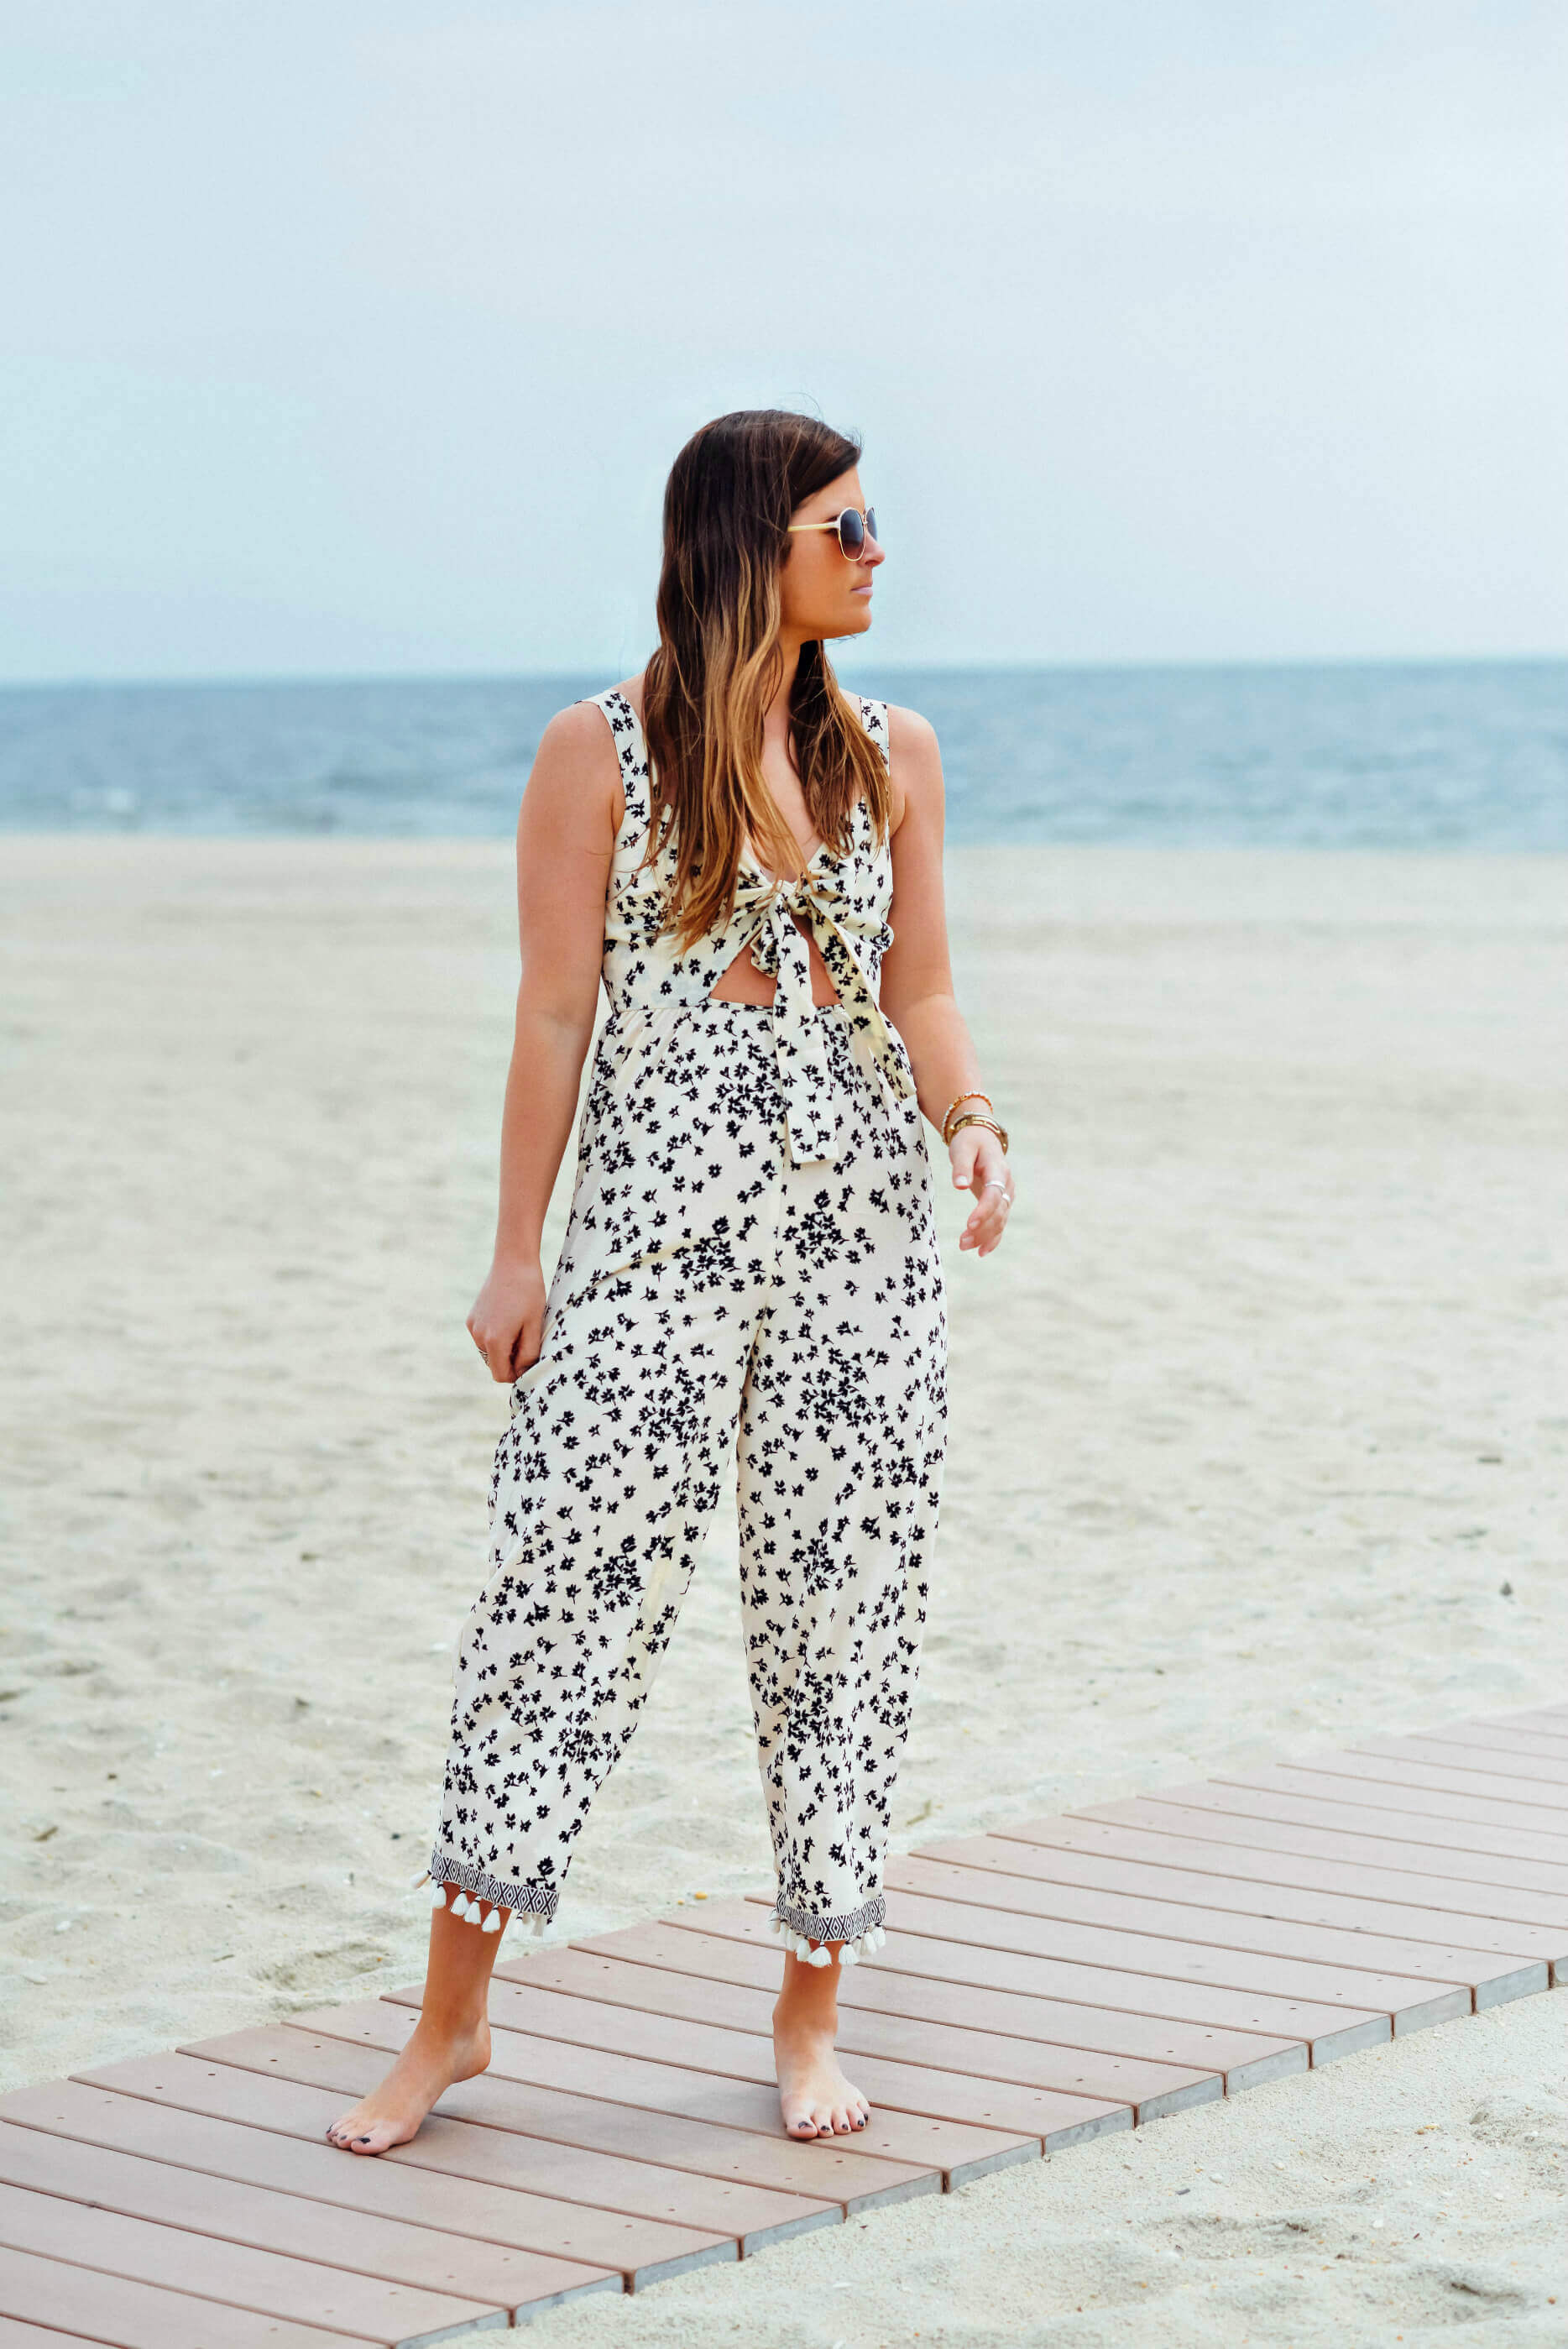 ASOS Floral Cut Out Tie Front Jumpsuit, Tilden of To Be Bright